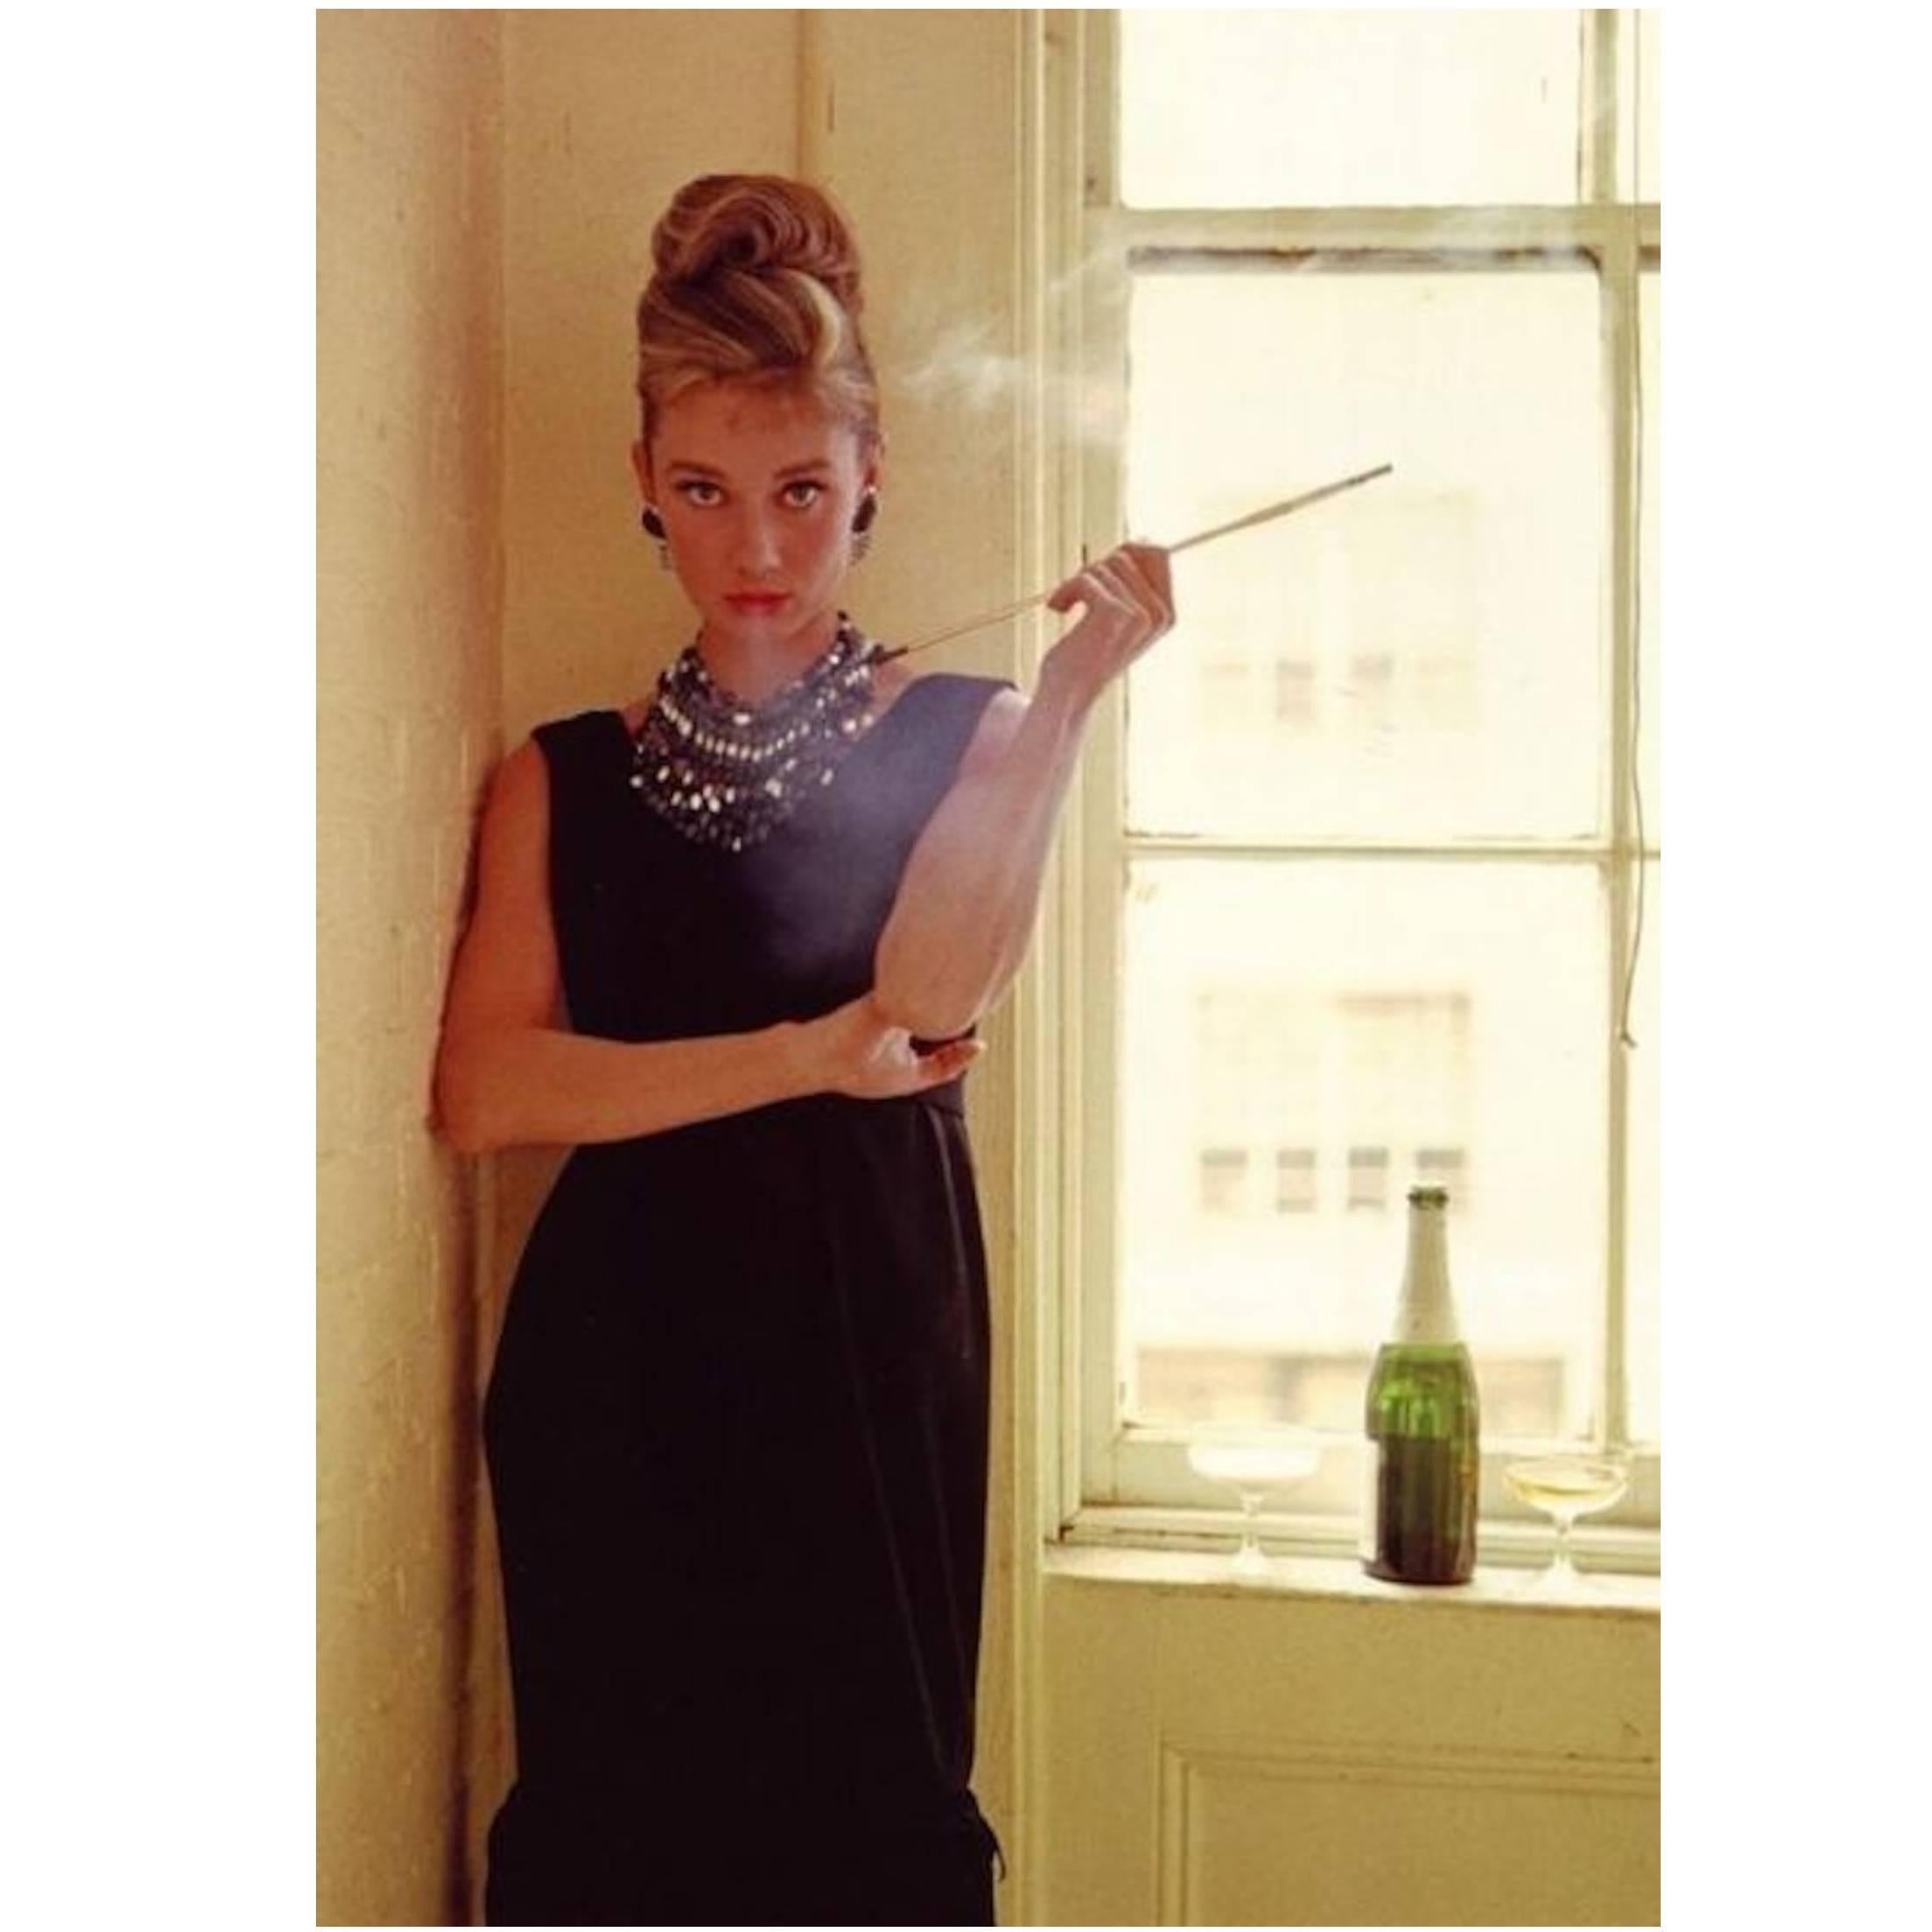 Original Photograph of Audrey Hepburn in “Breakfast at Tiffany’s” For Sale